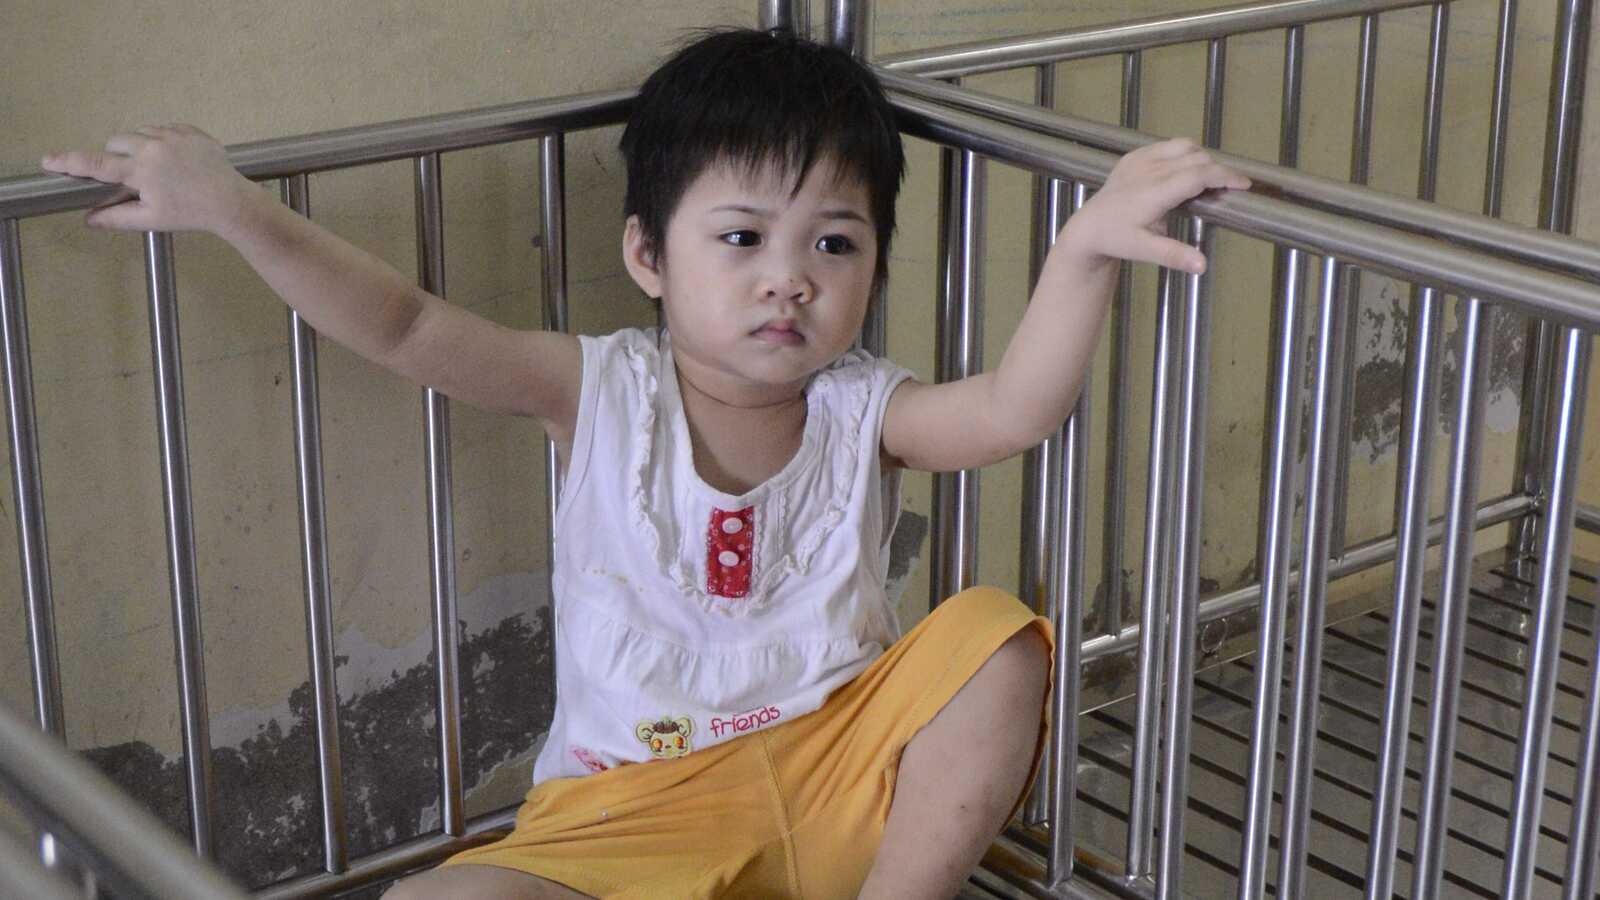 A child sits in a bare crib in an orphanage in Vietnam.